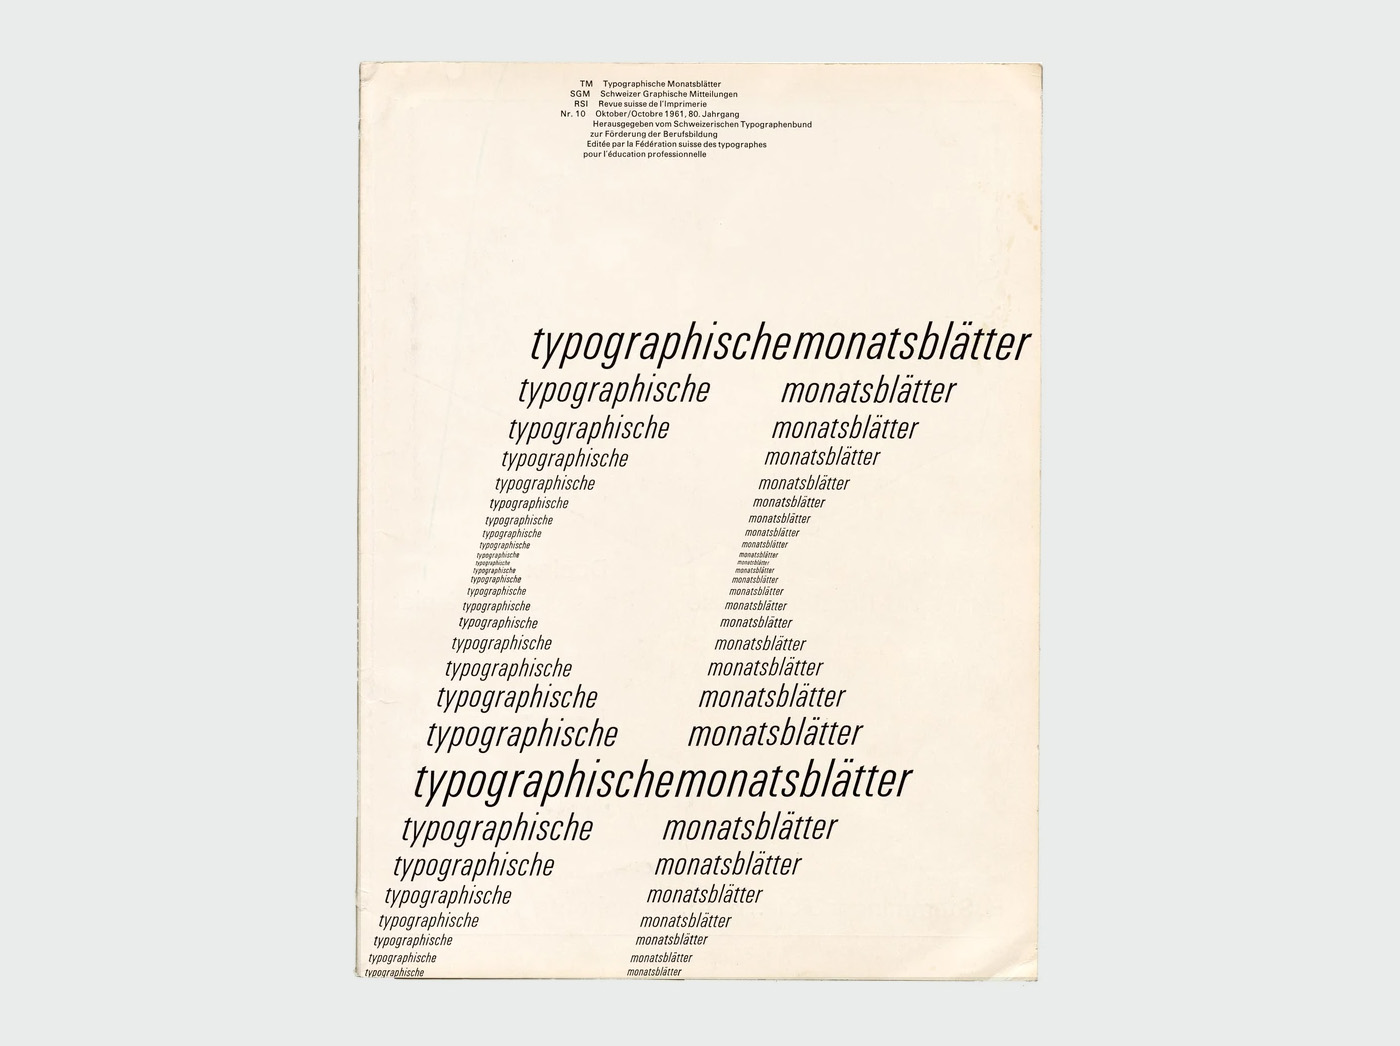 White cover with repeated black type, Emil Ruder designed all the covers of the 1961 run of Typographische Monatsblätter with some variant of Univers, repeating this pattern by increasing and decreasing point sizes.